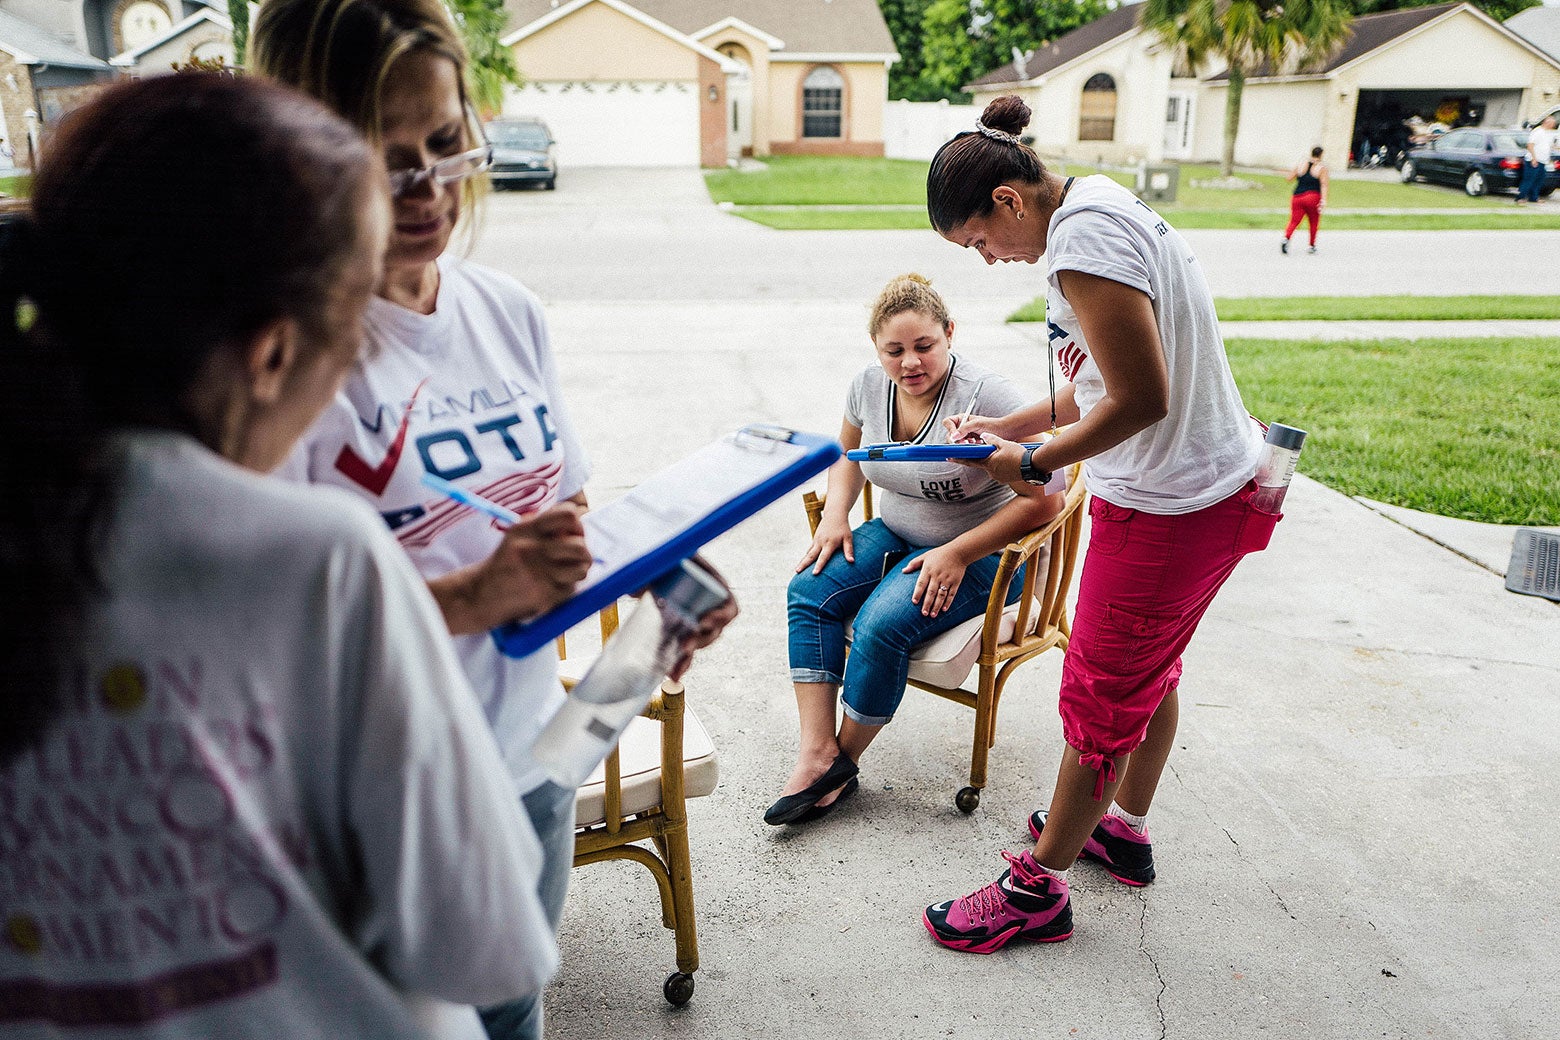 A group from Mi Familia Vota registering people to vote in a driveway.